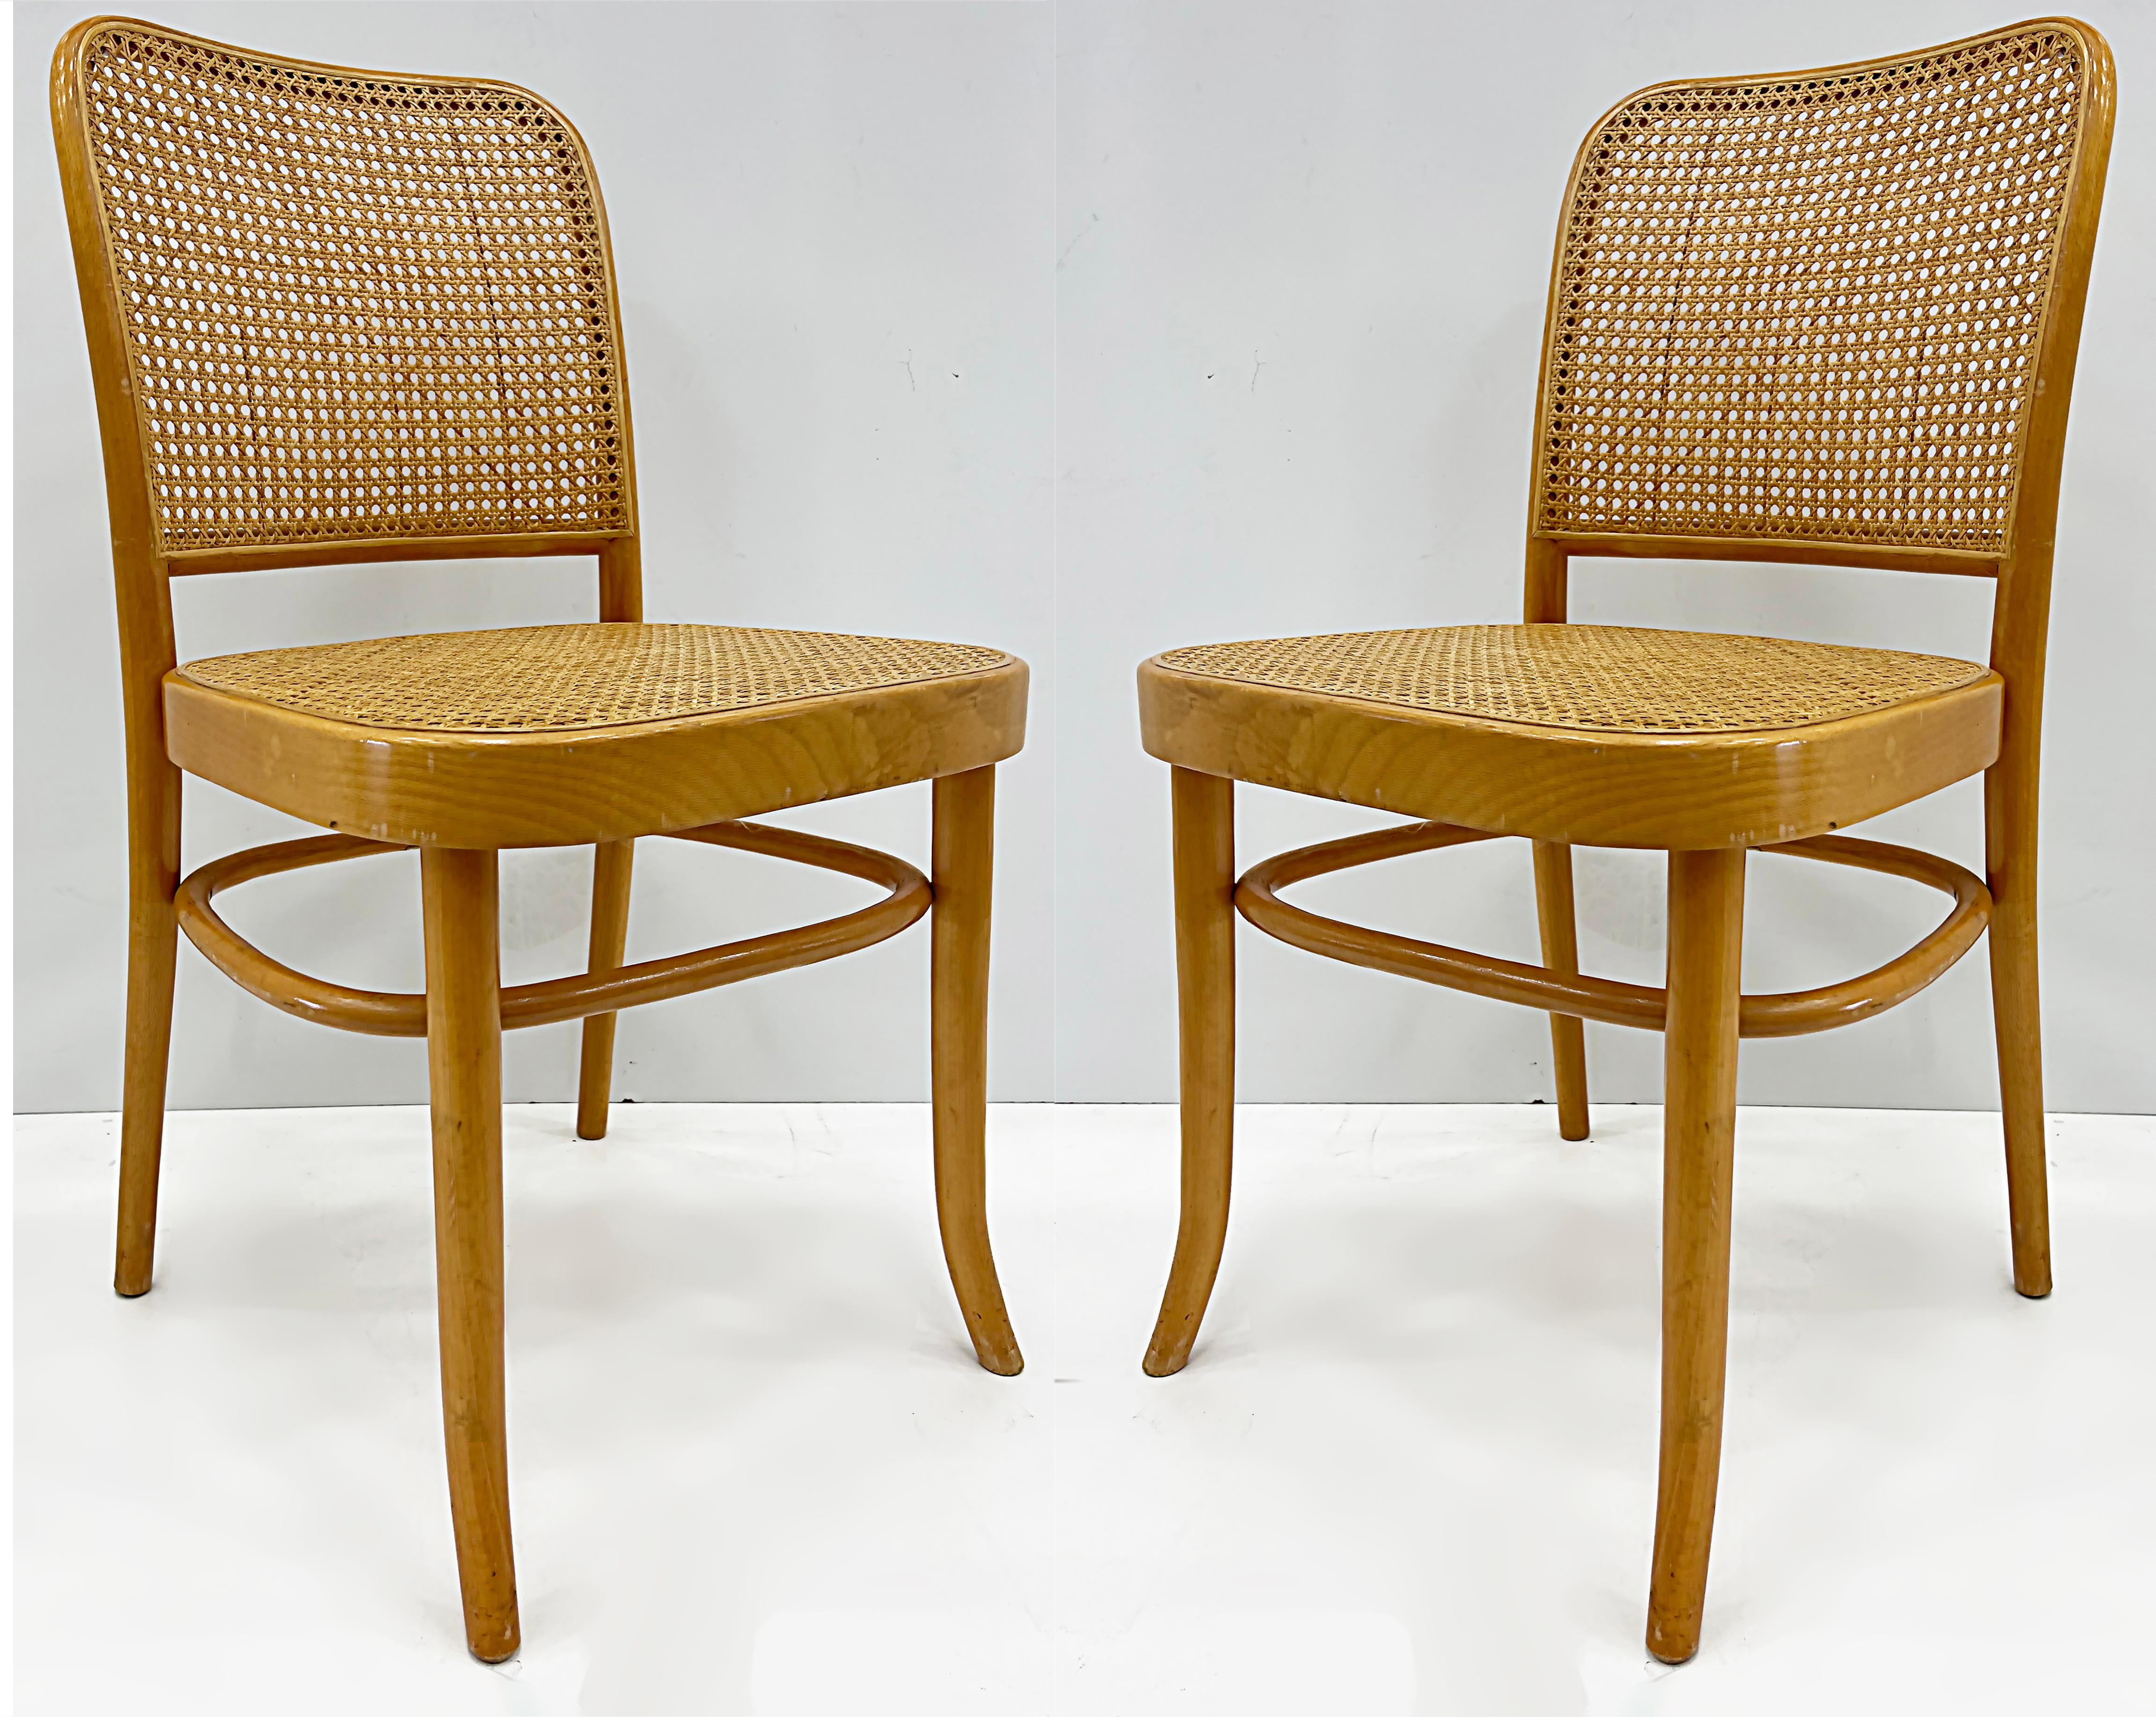 Salvatore Leone Vintage Bentwood Caned Chairs, Thonet Style For Sale 5